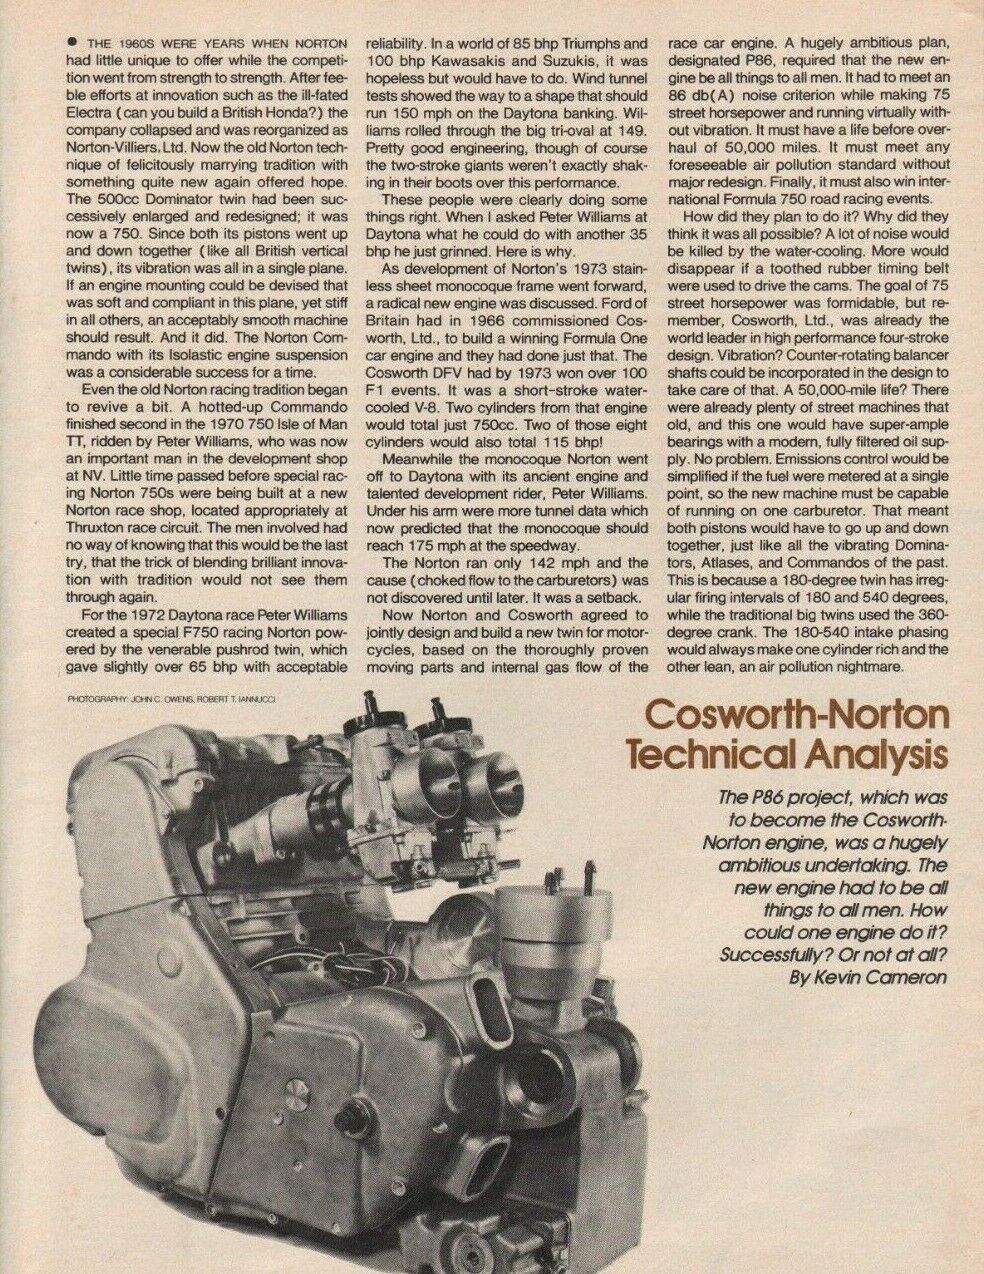 1980 Cosworth-norton Technical Analysis - 8-page Vintage Motorcycle Article